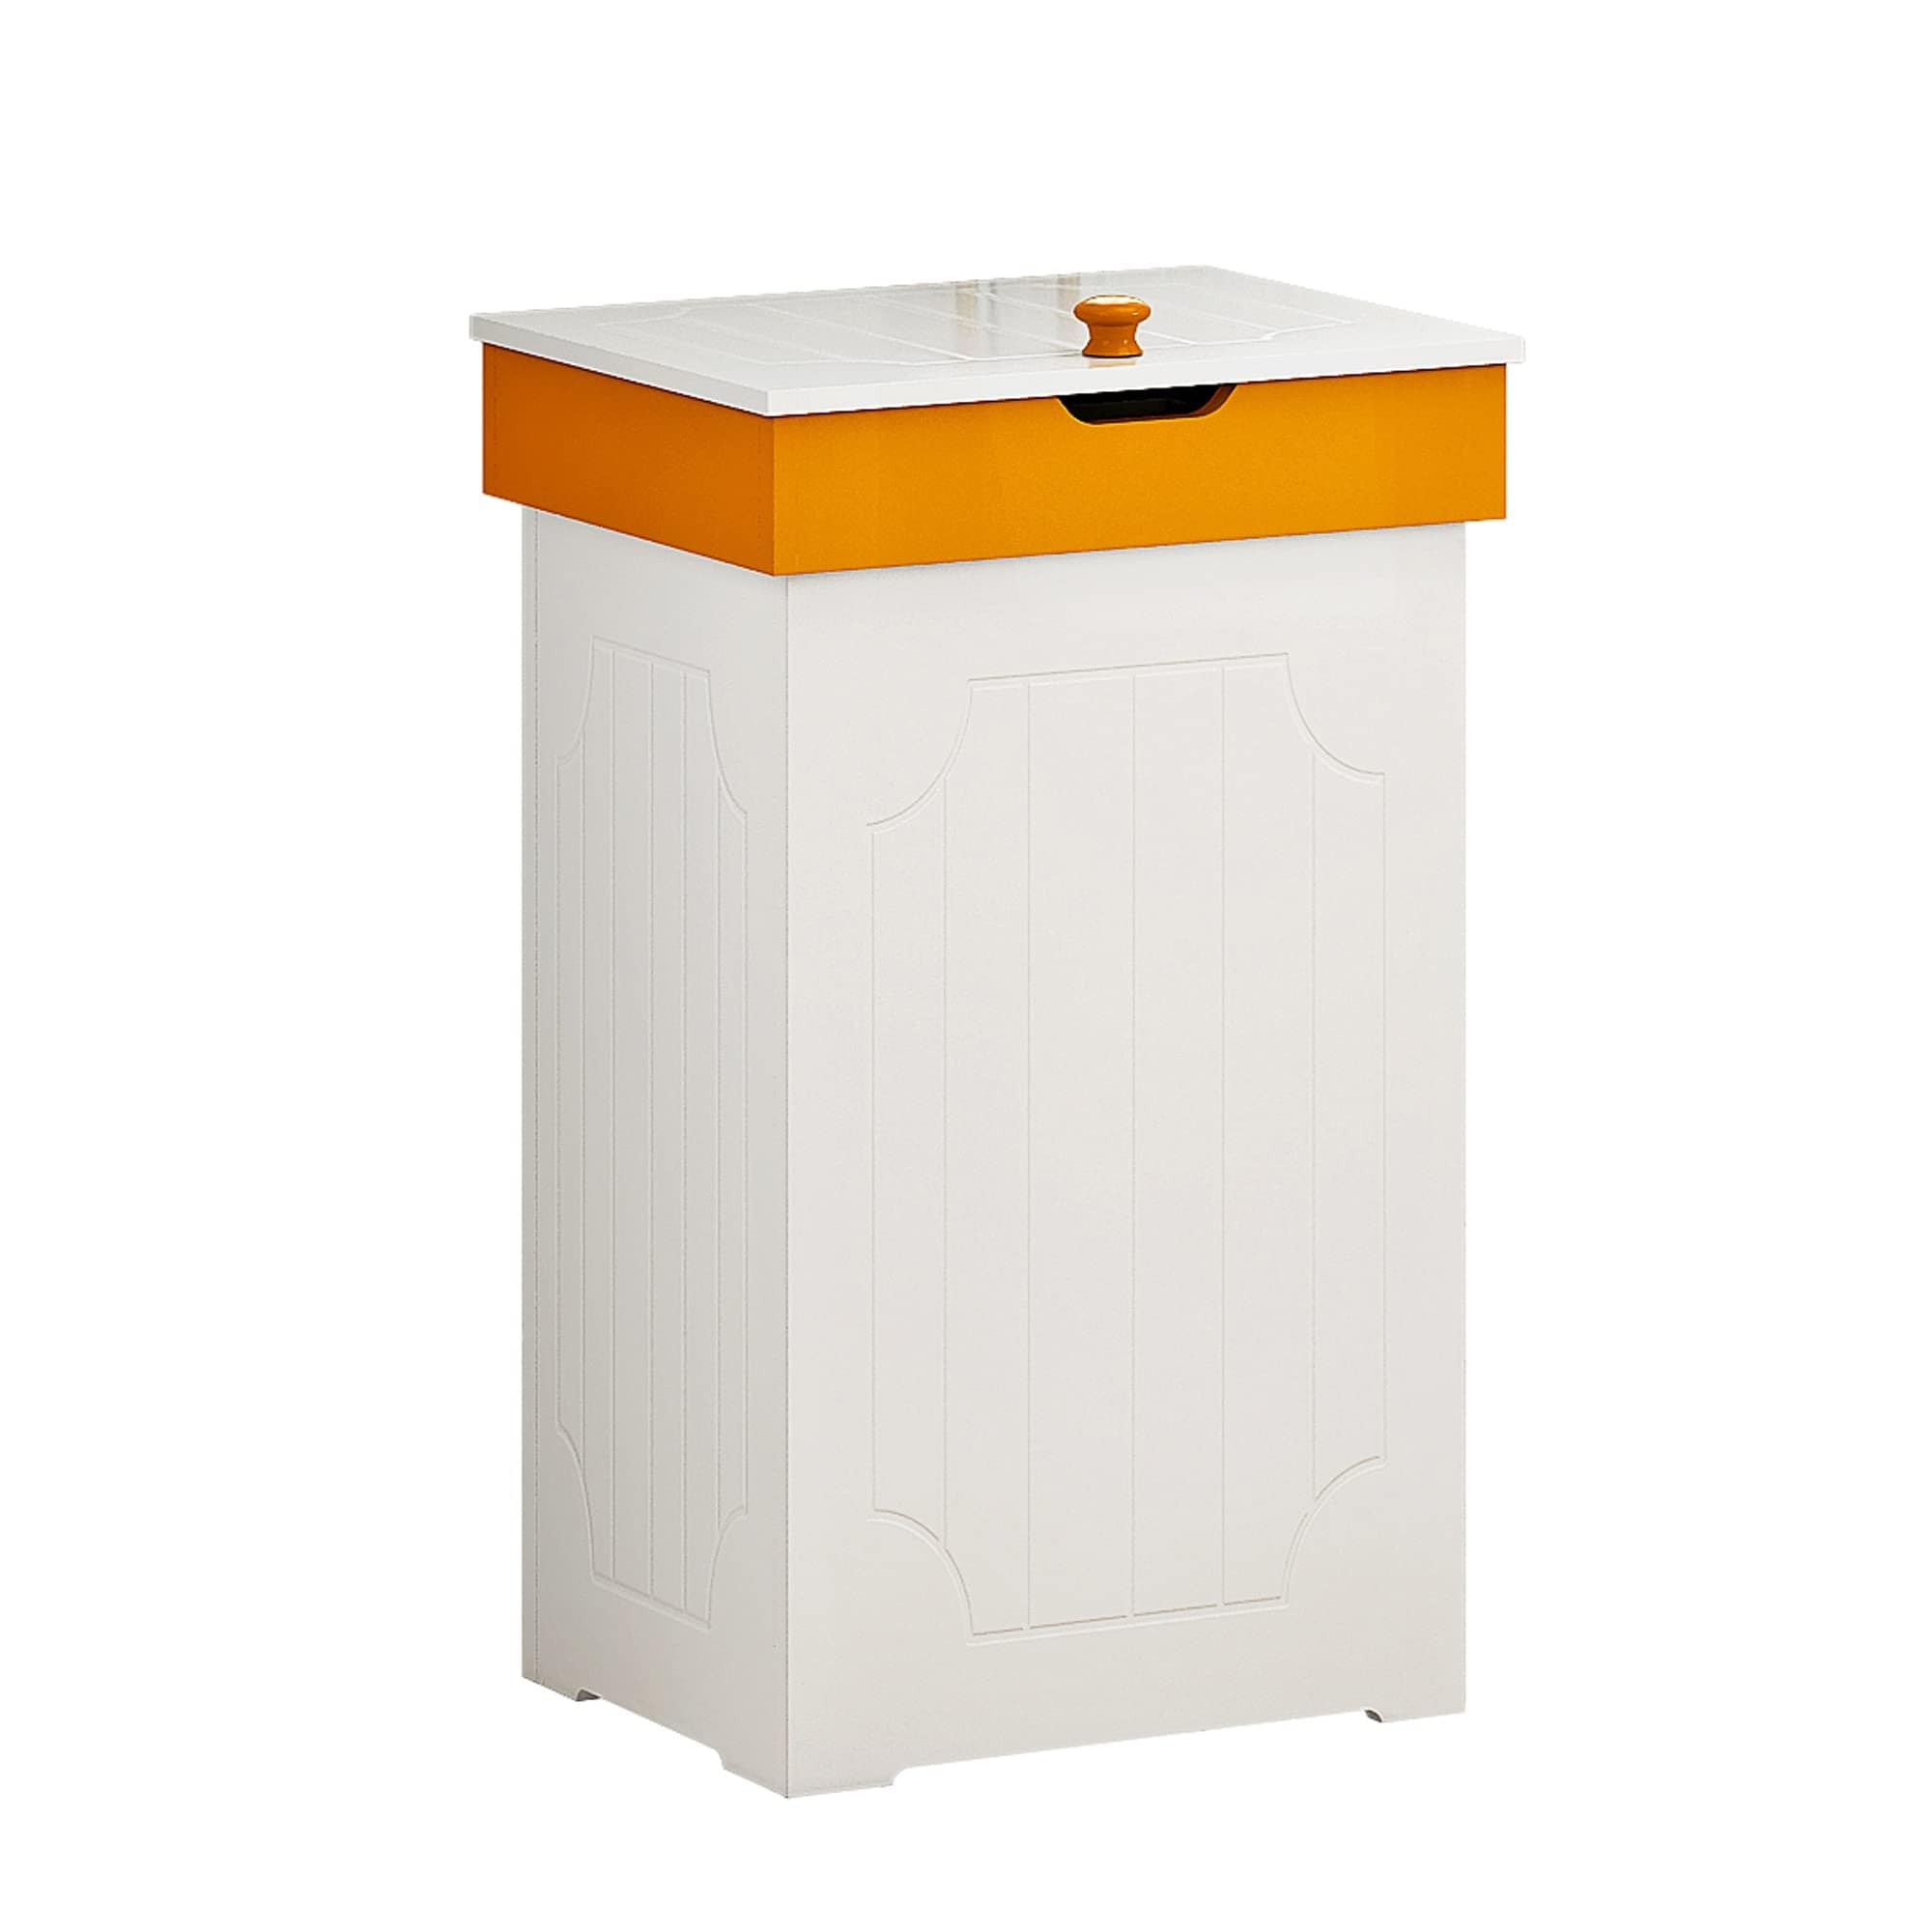 https://ak1.ostkcdn.com/images/products/is/images/direct/e5434a815f19fac7952bf63d1ad62f1102d5a8a2/Trash-Can-Cabinet%2C-23-Gallon-Kitchen-Garbage-Can%2C-Wooden-Recycling-Trash-Bin%2C-Dog-Proof-Trash-Can%2C-Home-Trash-Cabinet-with-Lid.jpg